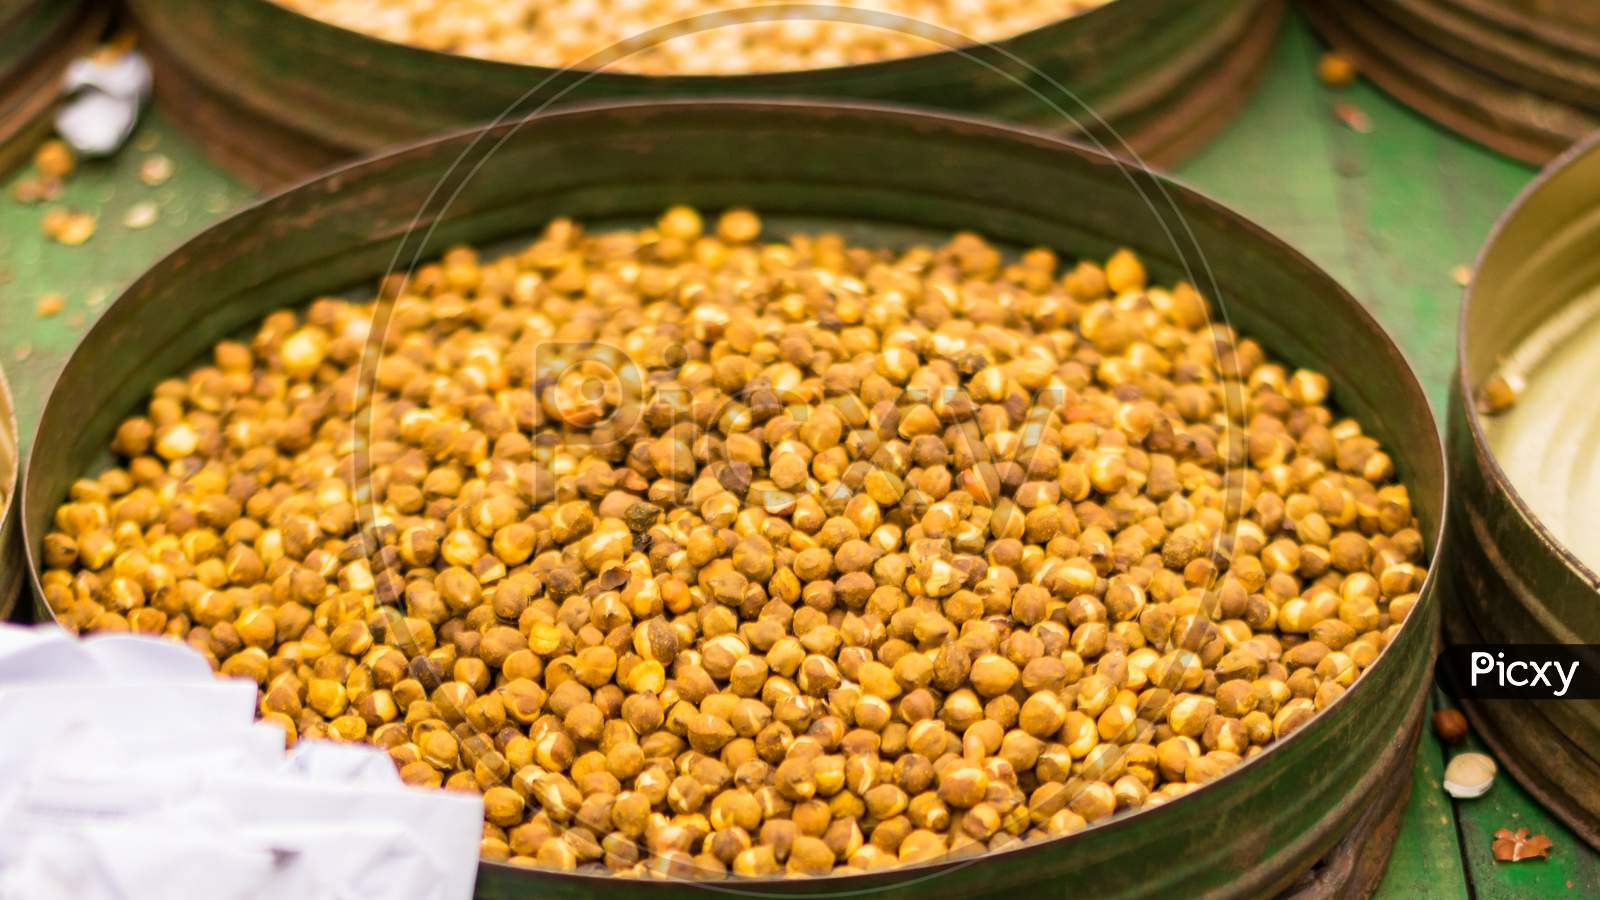 Roasted Chickpeas Displayed On A Green Bowl For Sell In A Road Side Food Van